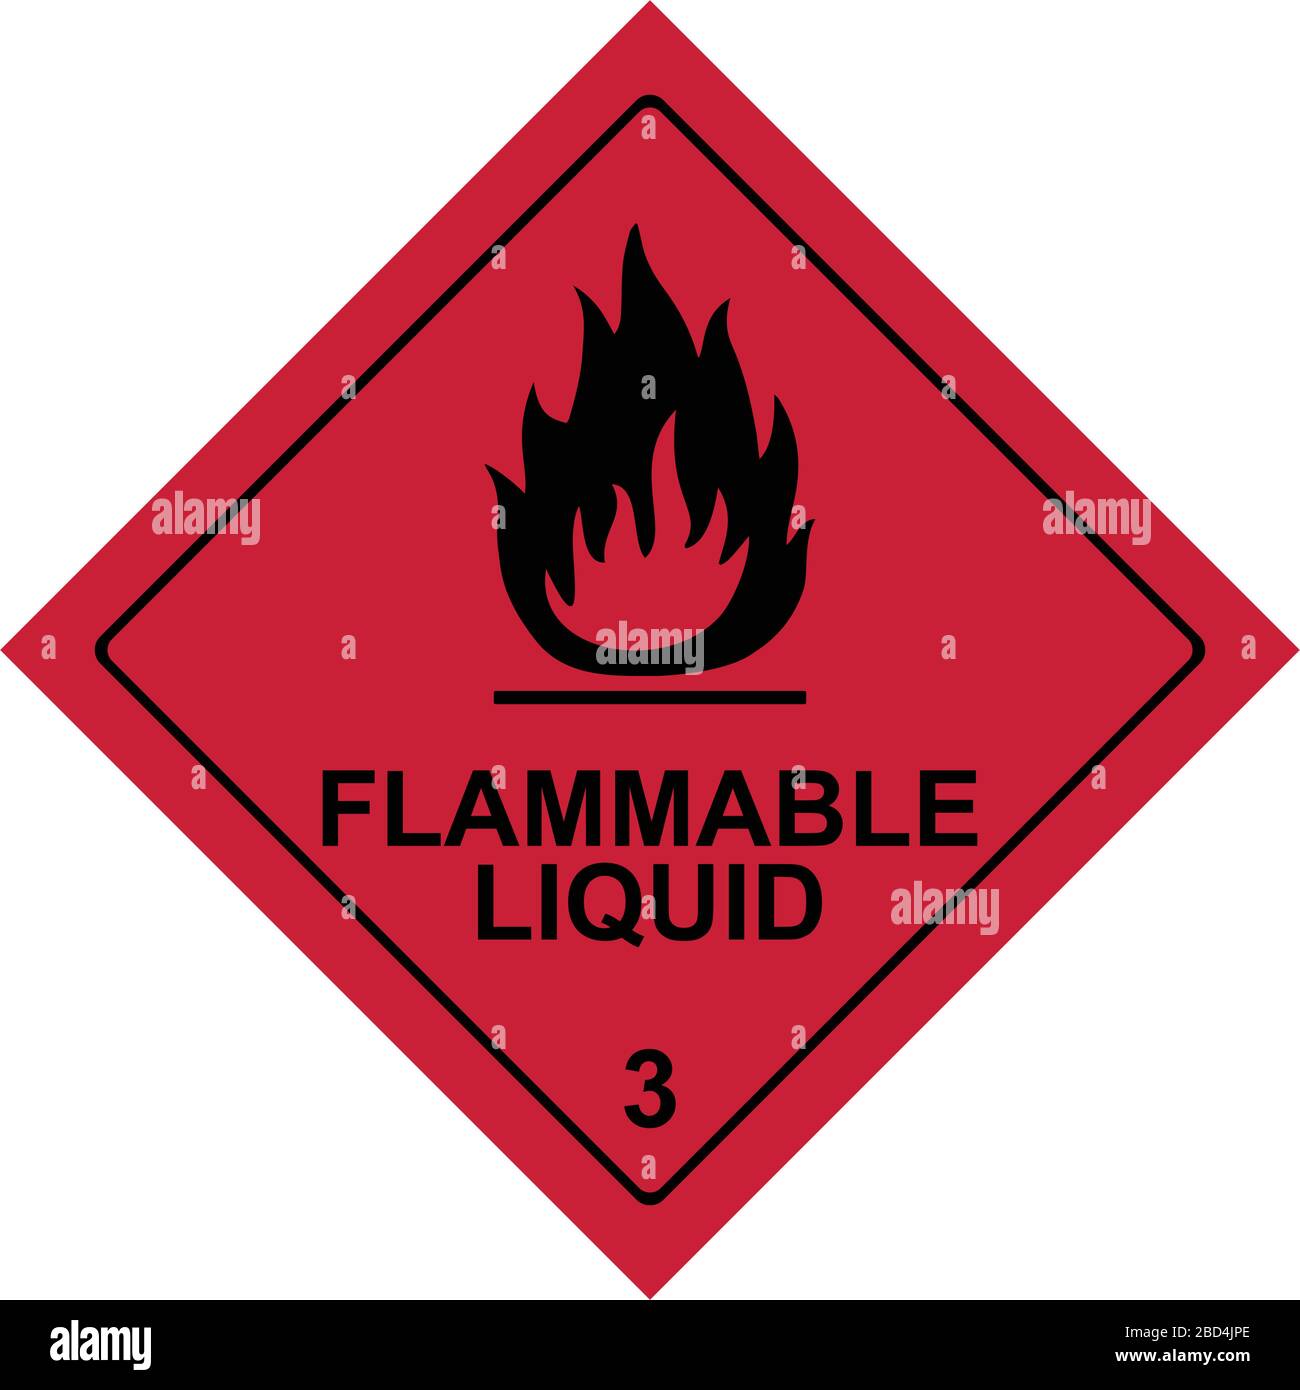 Flammable Liquid sign vector design isolated on white background Stock Vector